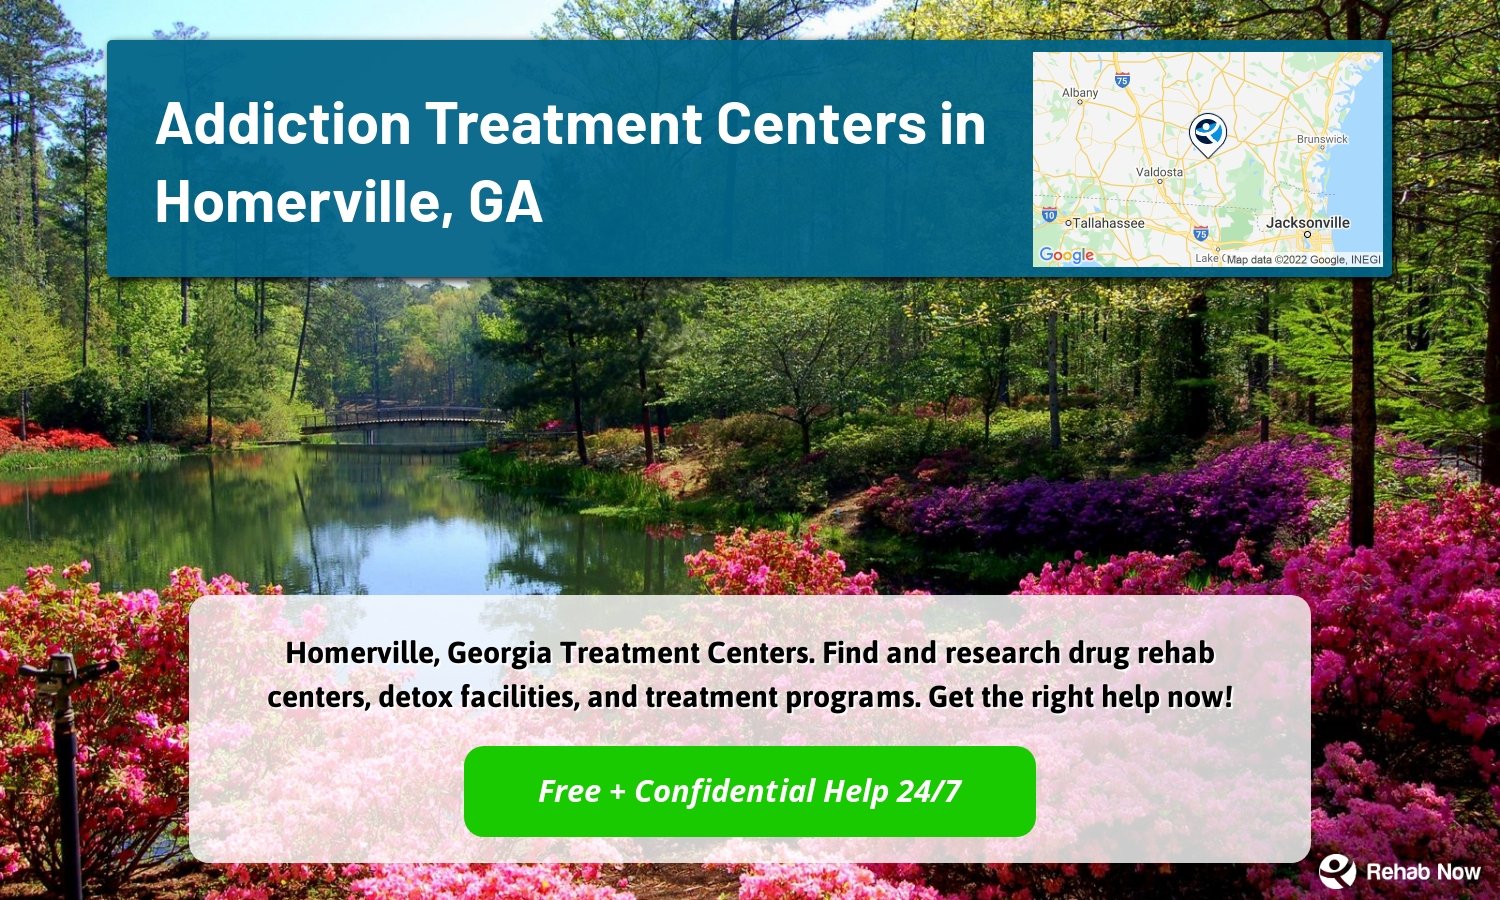 Homerville, Georgia Treatment Centers. Find and research drug rehab centers, detox facilities, and treatment programs. Get the right help now!